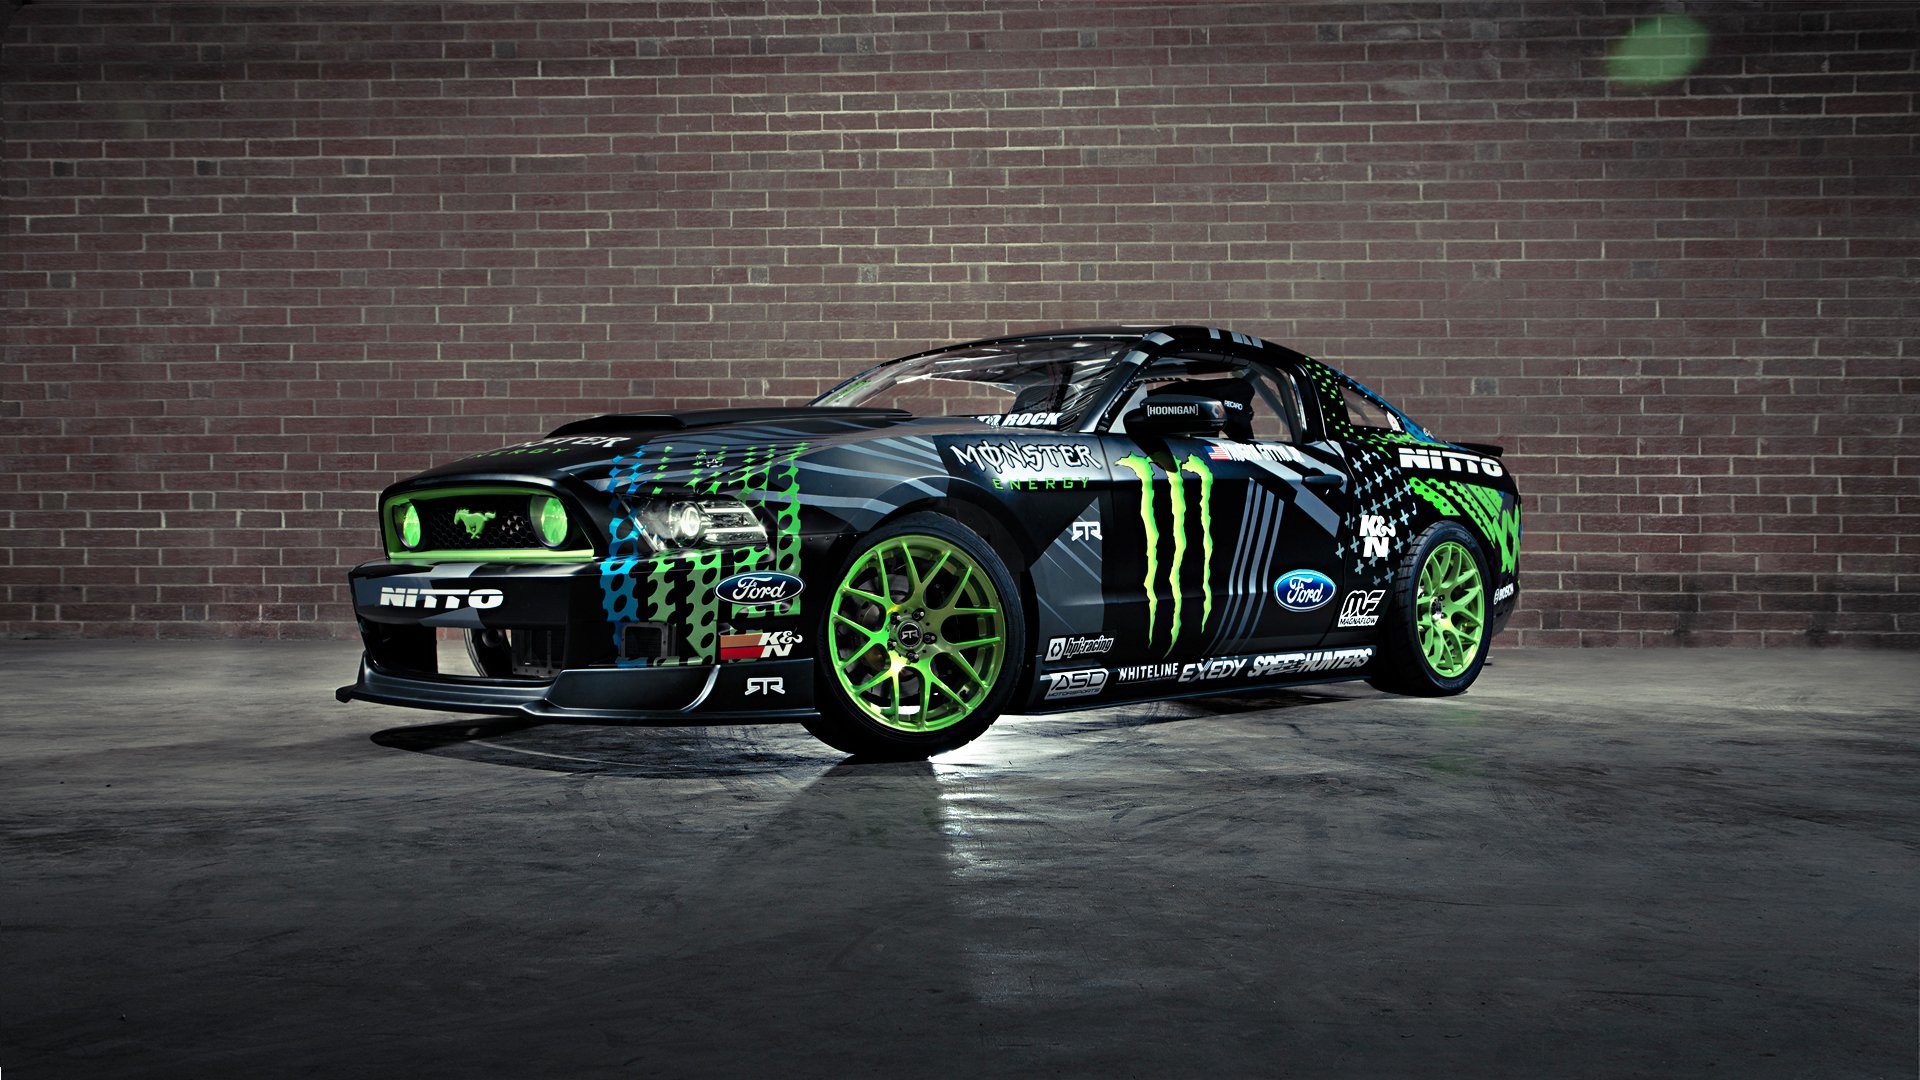 1920x1080 Download Monster Energy Wallpaper For Iphone e0n47 hdxwallpaperz 